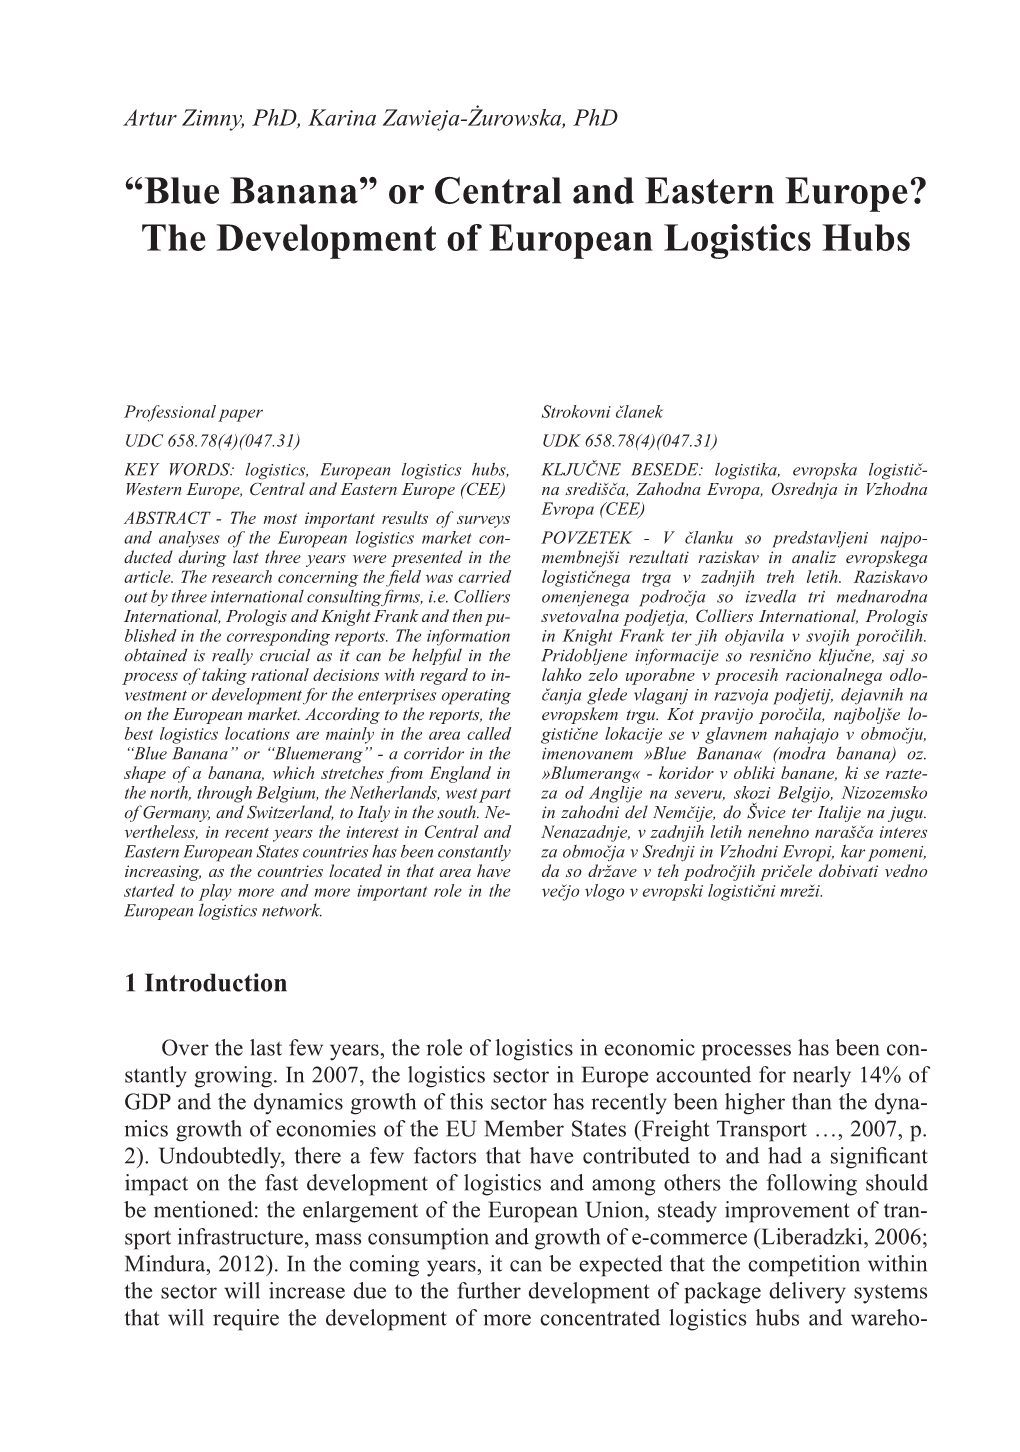 “Blue Banana” Or Central and Eastern Europe? the Development of European Logistics Hubs